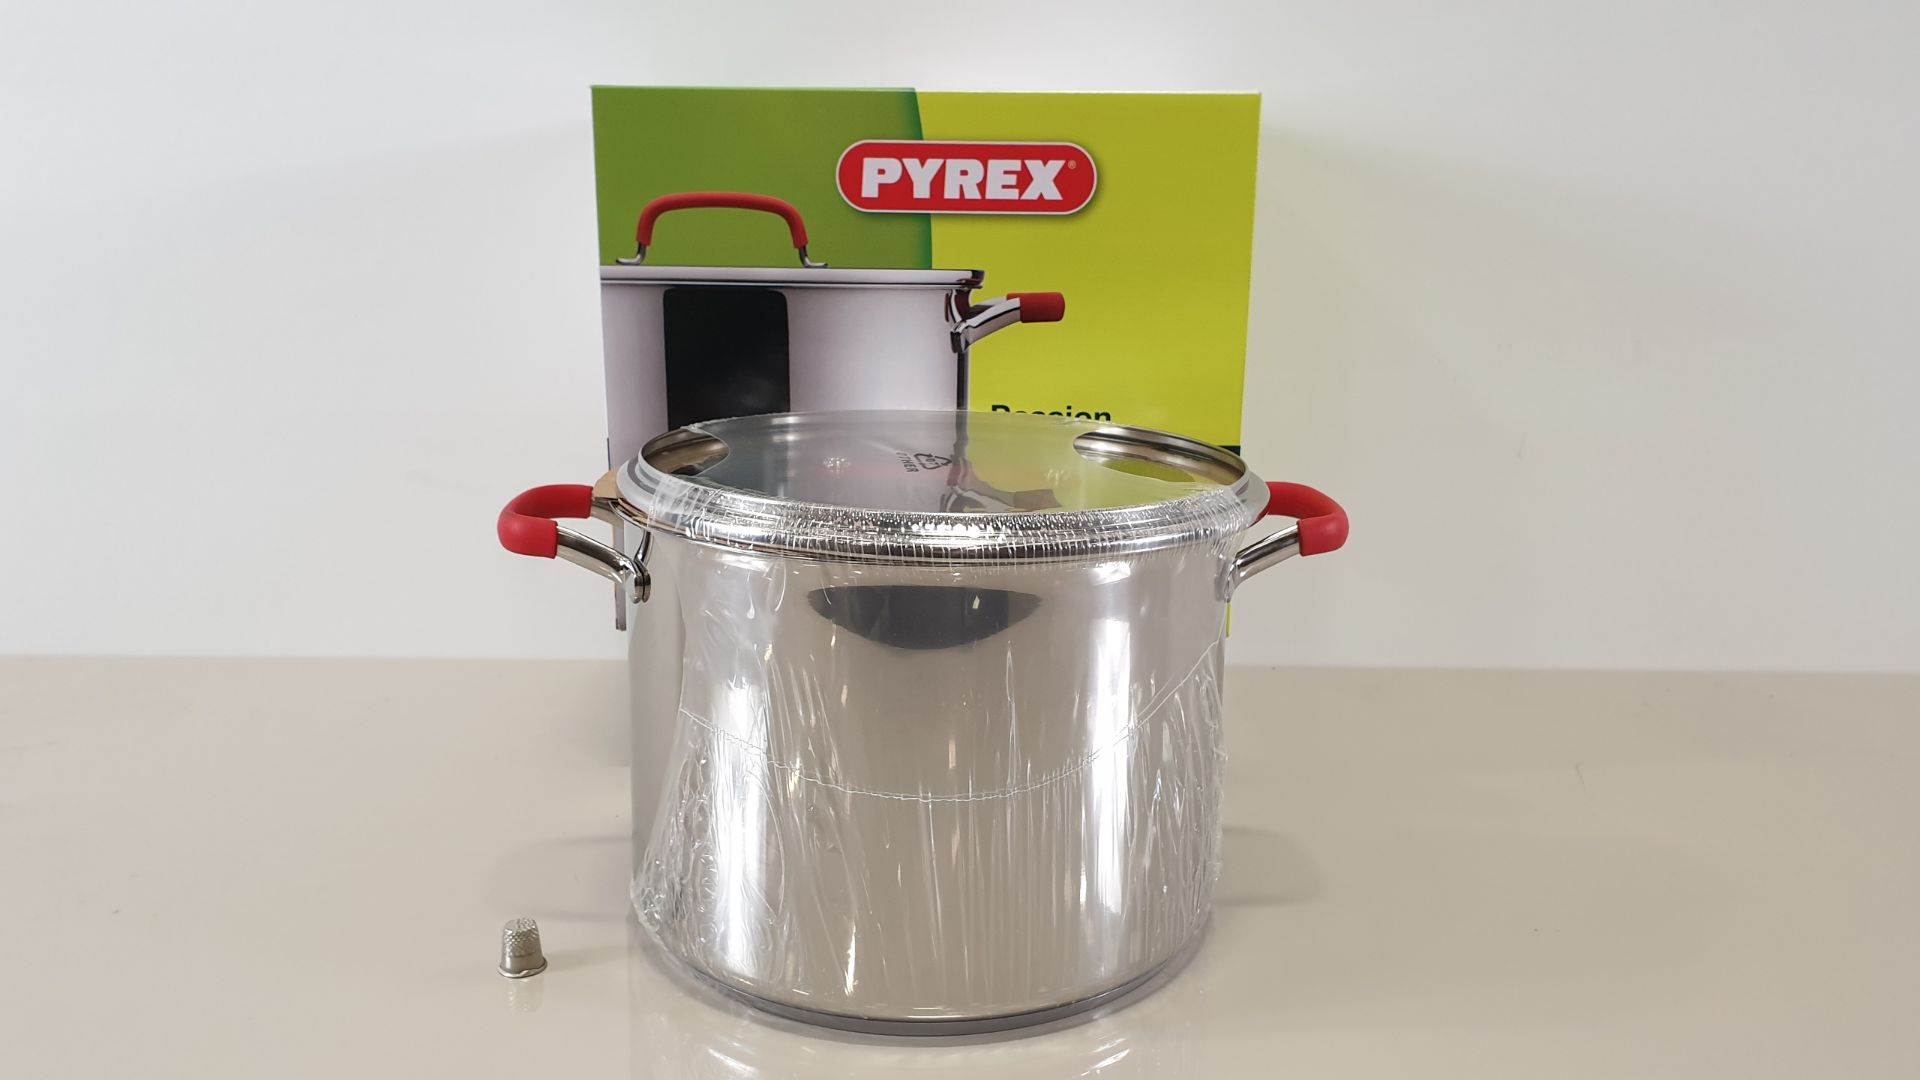 6 X PYREX PASSION STAINLESS STEEL STOCKPOTS WITH GLASS LIDS 24CM 7.8 LITRE CAPACITY (IN 3 CARTONS)